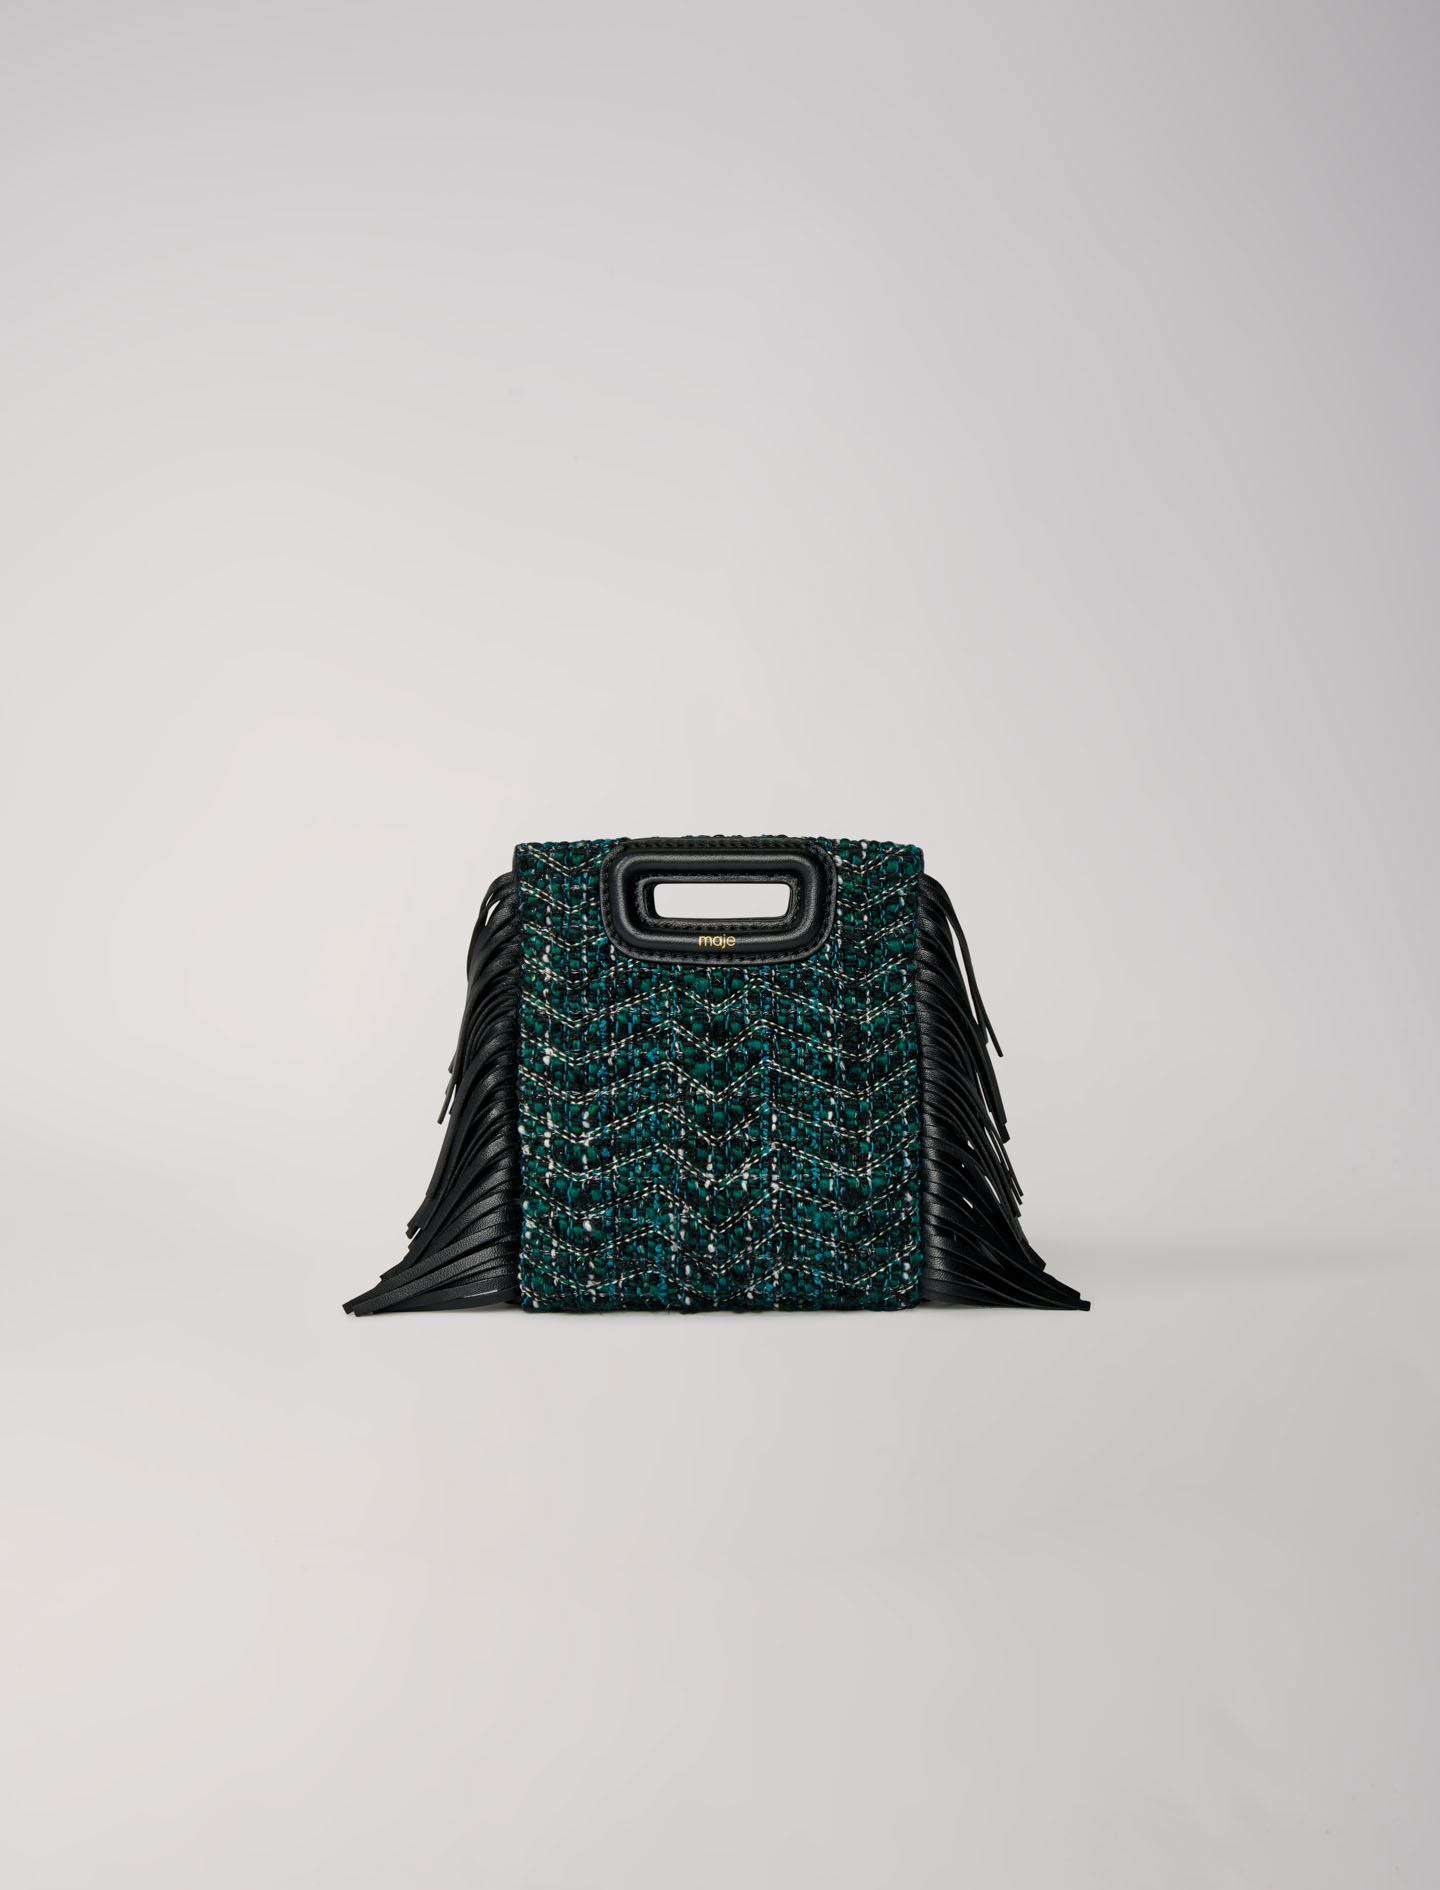 Mixte's cotton, M Mini bag in tweed for Fall/Winter, size Mixte-All Bags-OS (ONE SIZE), in color Bottle Green /